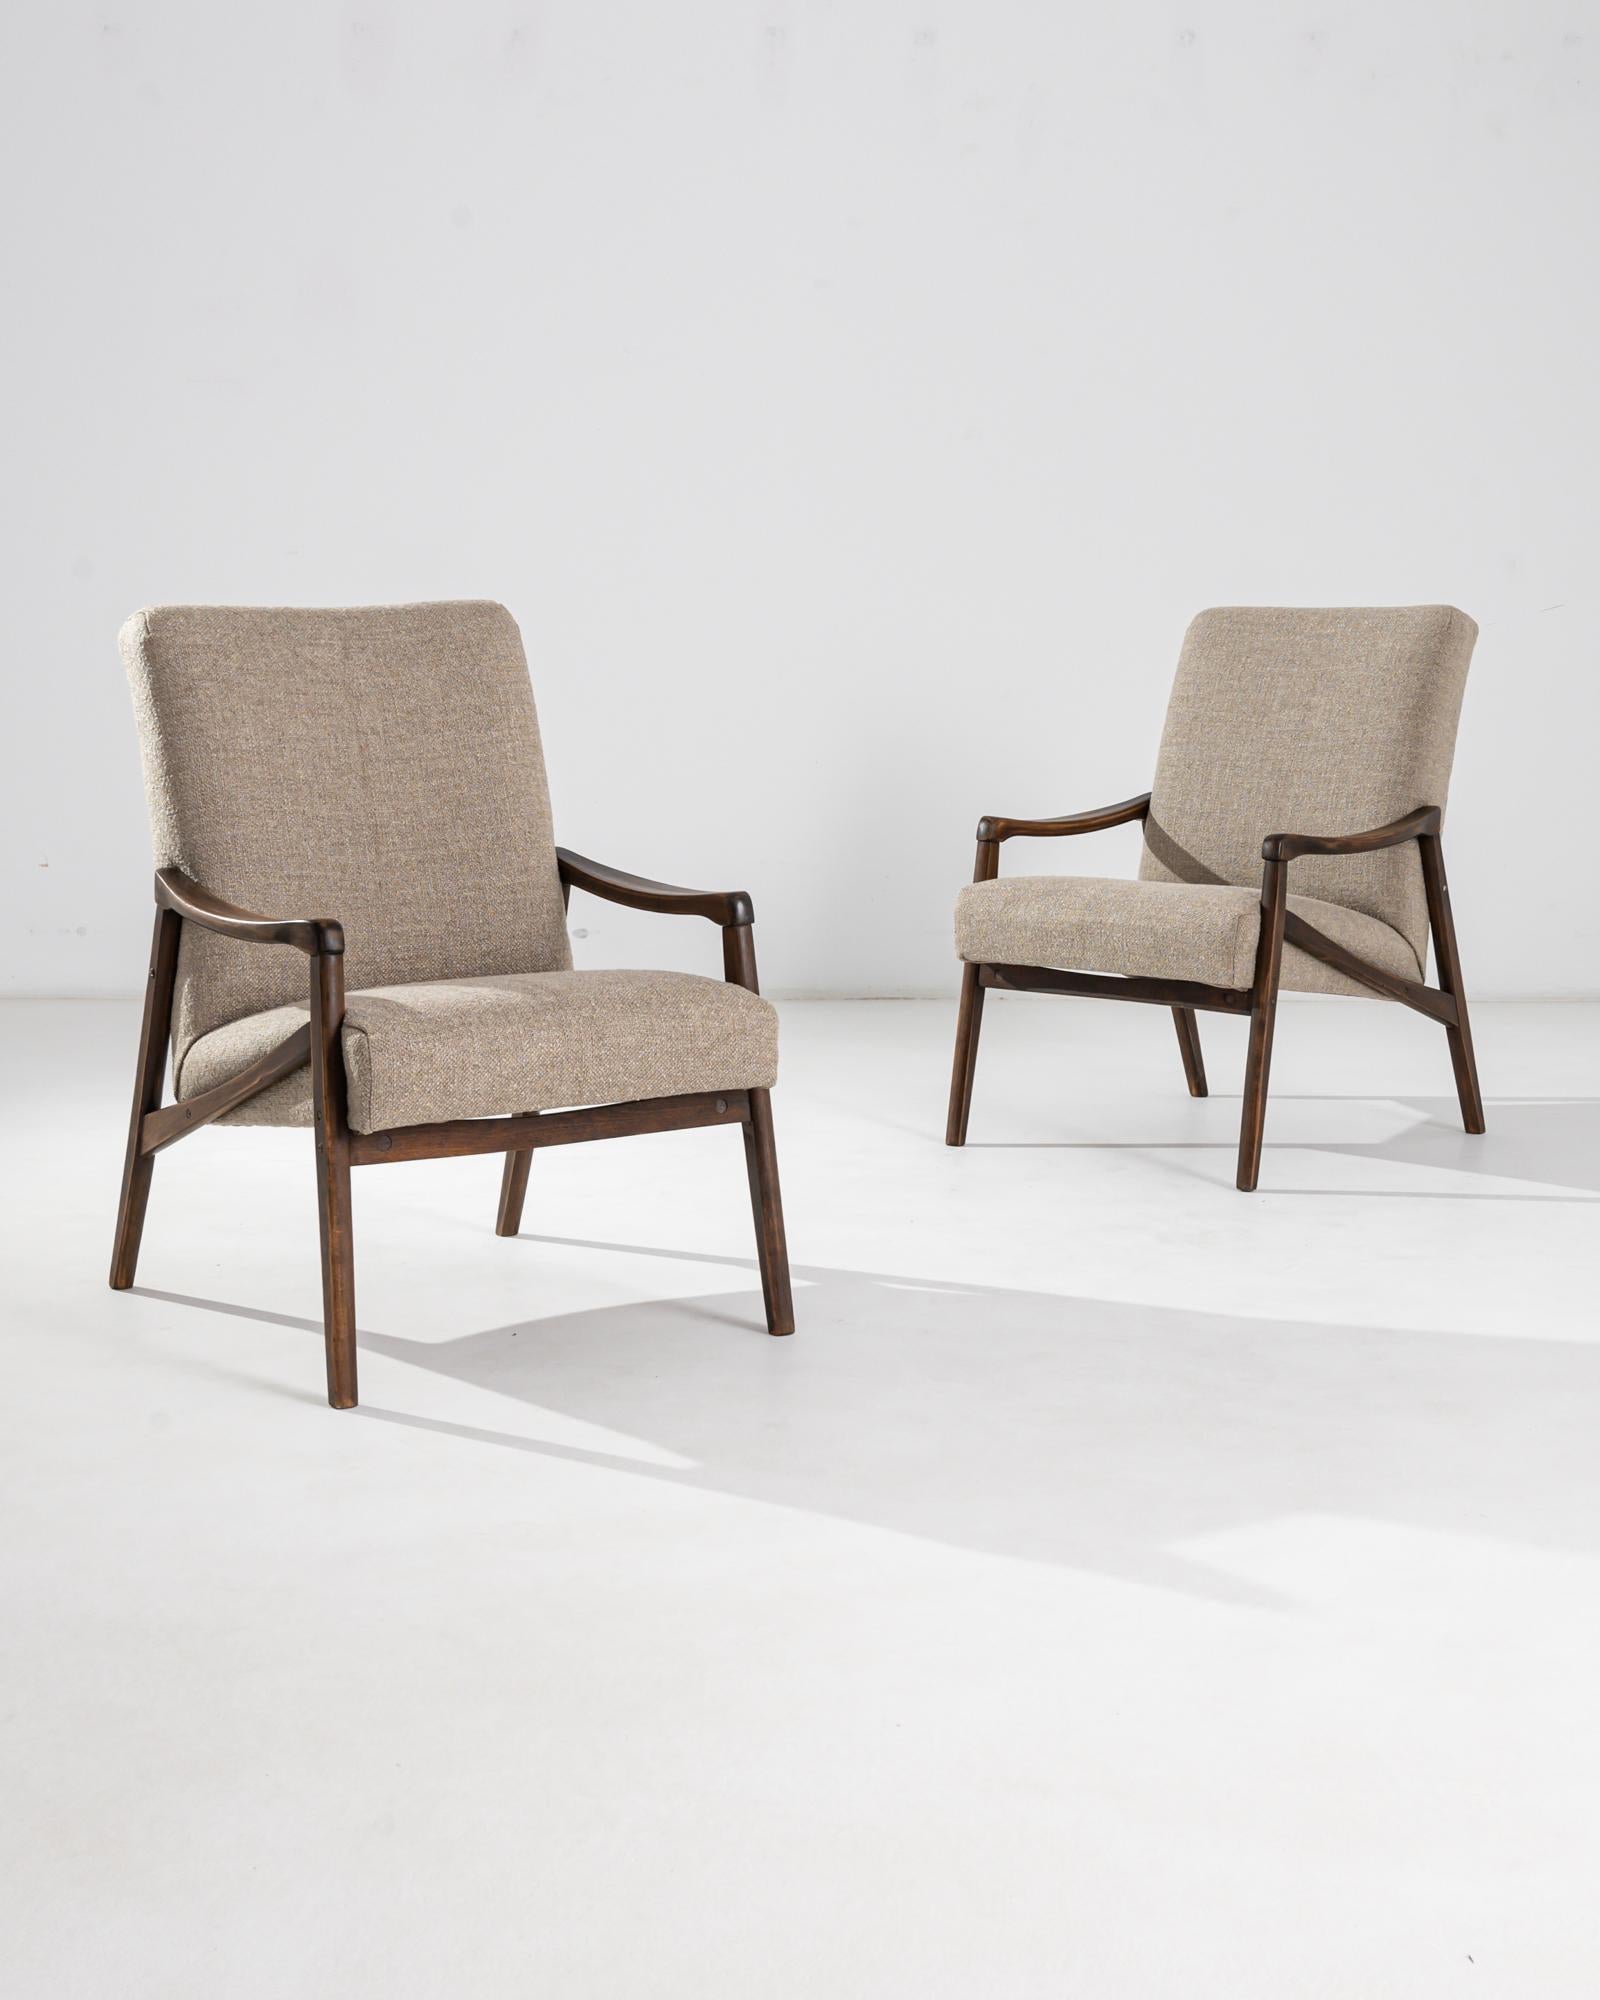 A pair of armchairs produced in the former Czechoslovakia, with the design attributed to Jiri Jiroutek. This 1960s design is re-upholstered in an updated beige upholstery; the neutral tone was chosen to compliment the polished patina of the hardwood